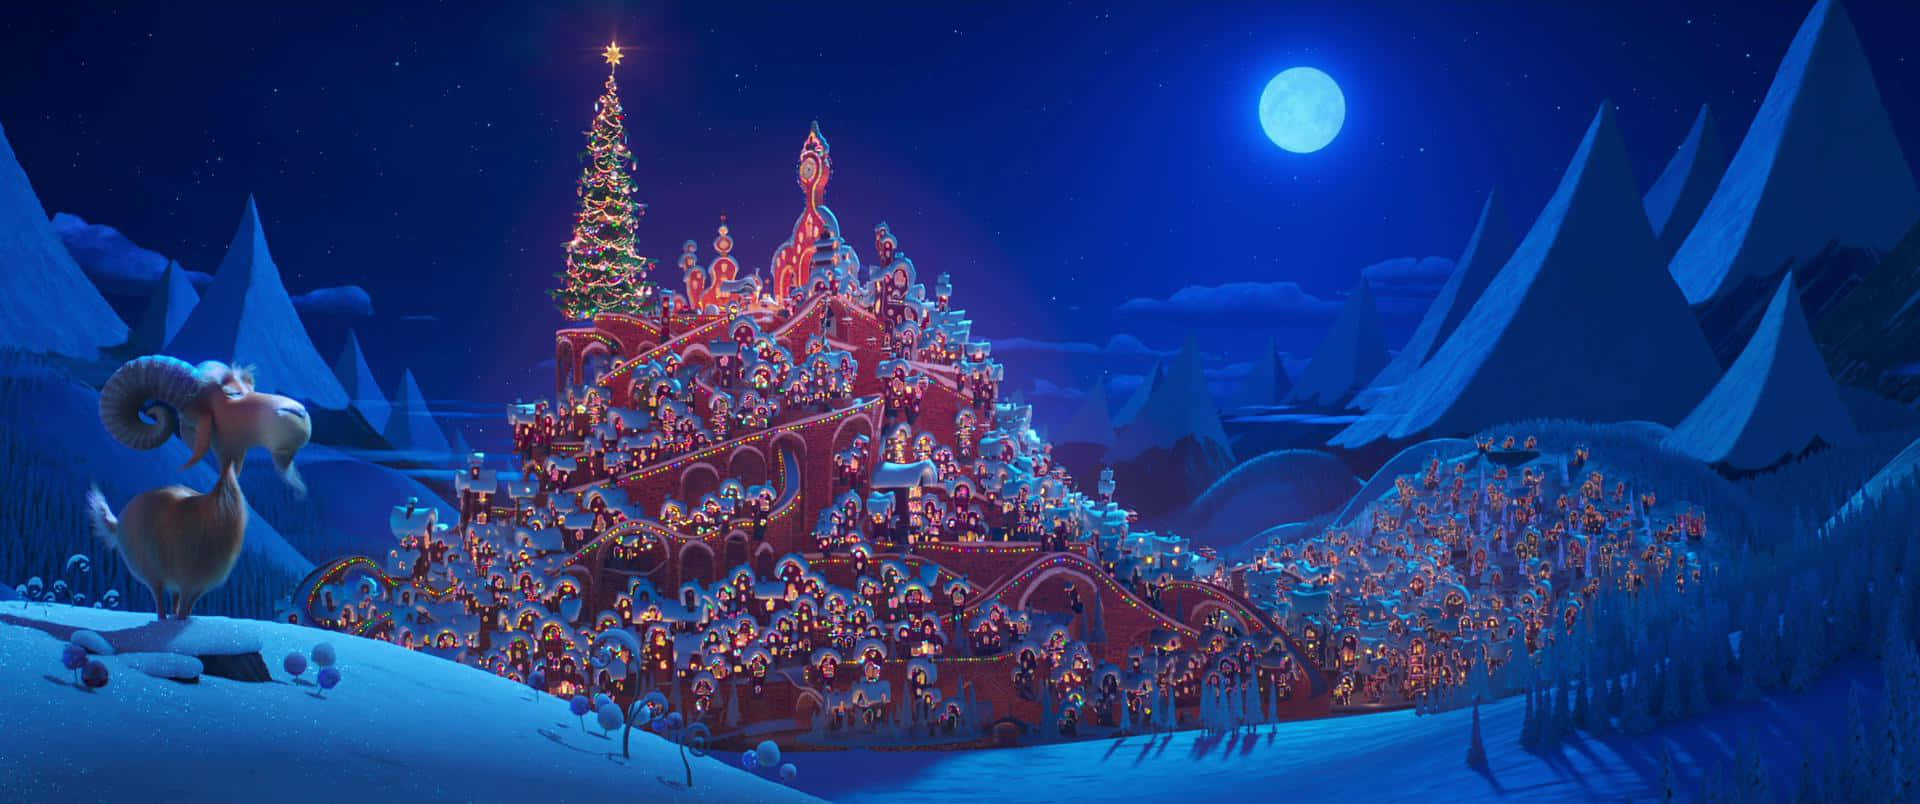 A Christmas Scene With A Castle In The Snow Wallpaper